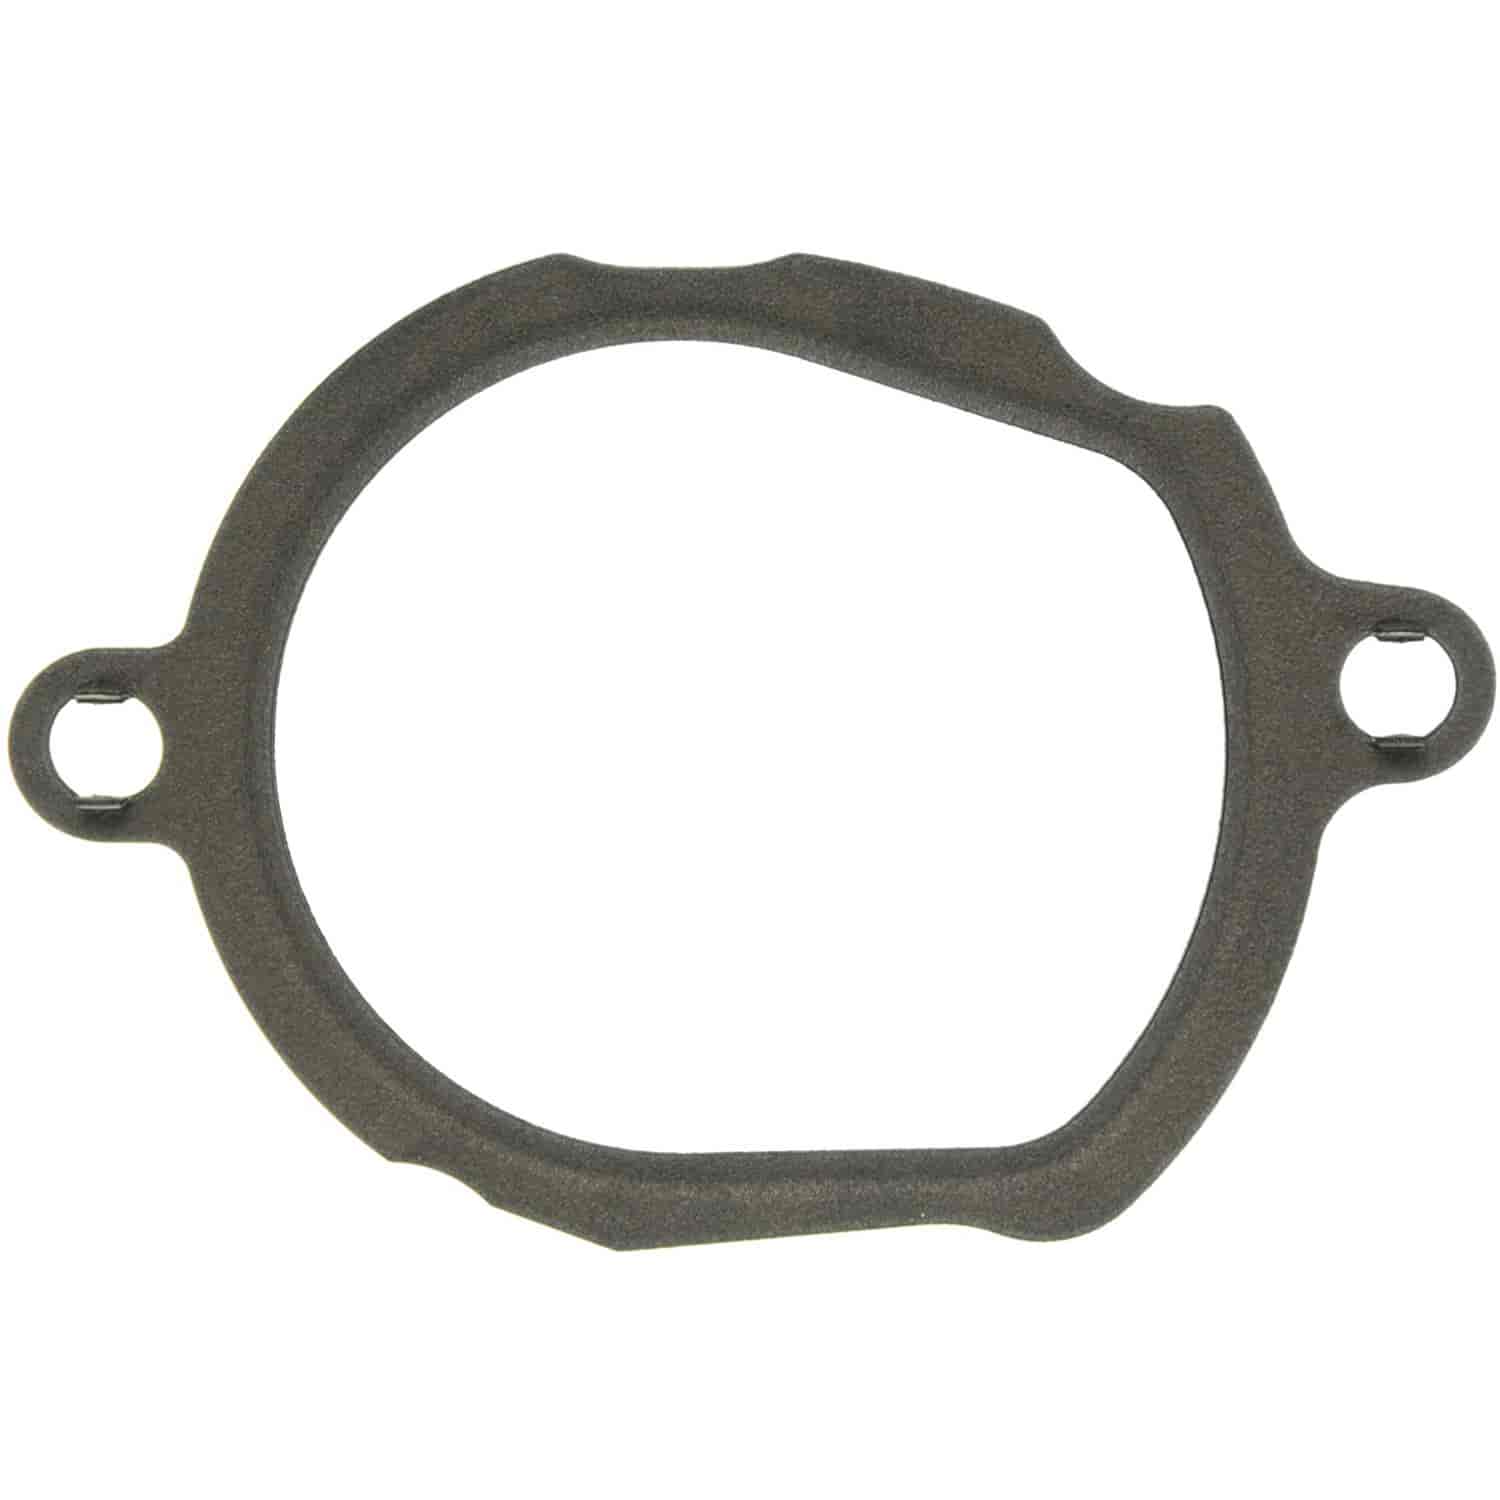 Thermostat Housing Gasket MERCEDES 3498CC 3.5L 272 SERIES 2006-2008 TO Eng SN# 30058493